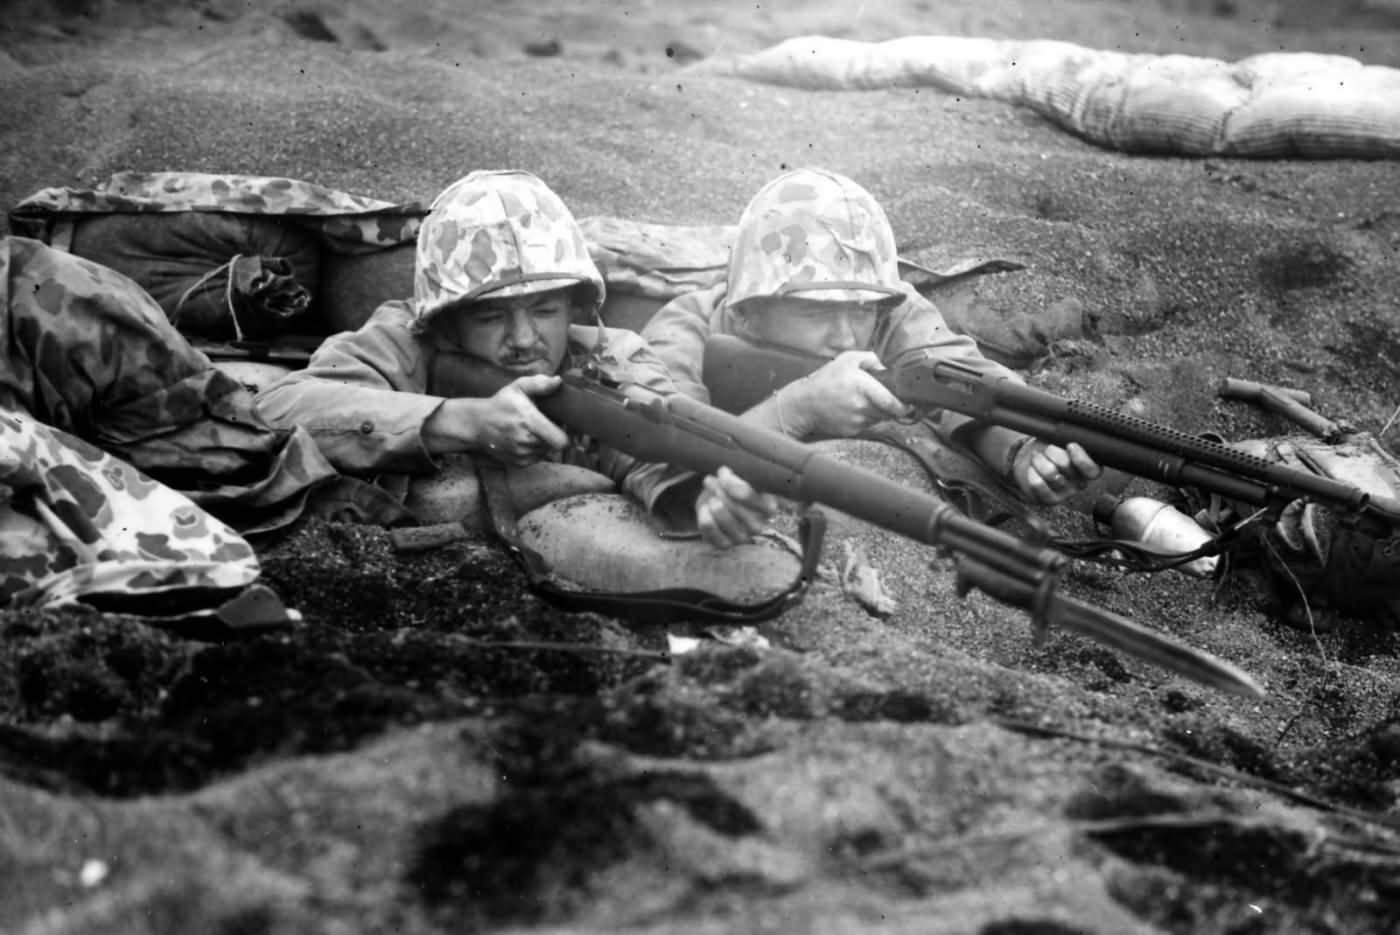 A_pair_of_Marines_in_a_dug_out_position_